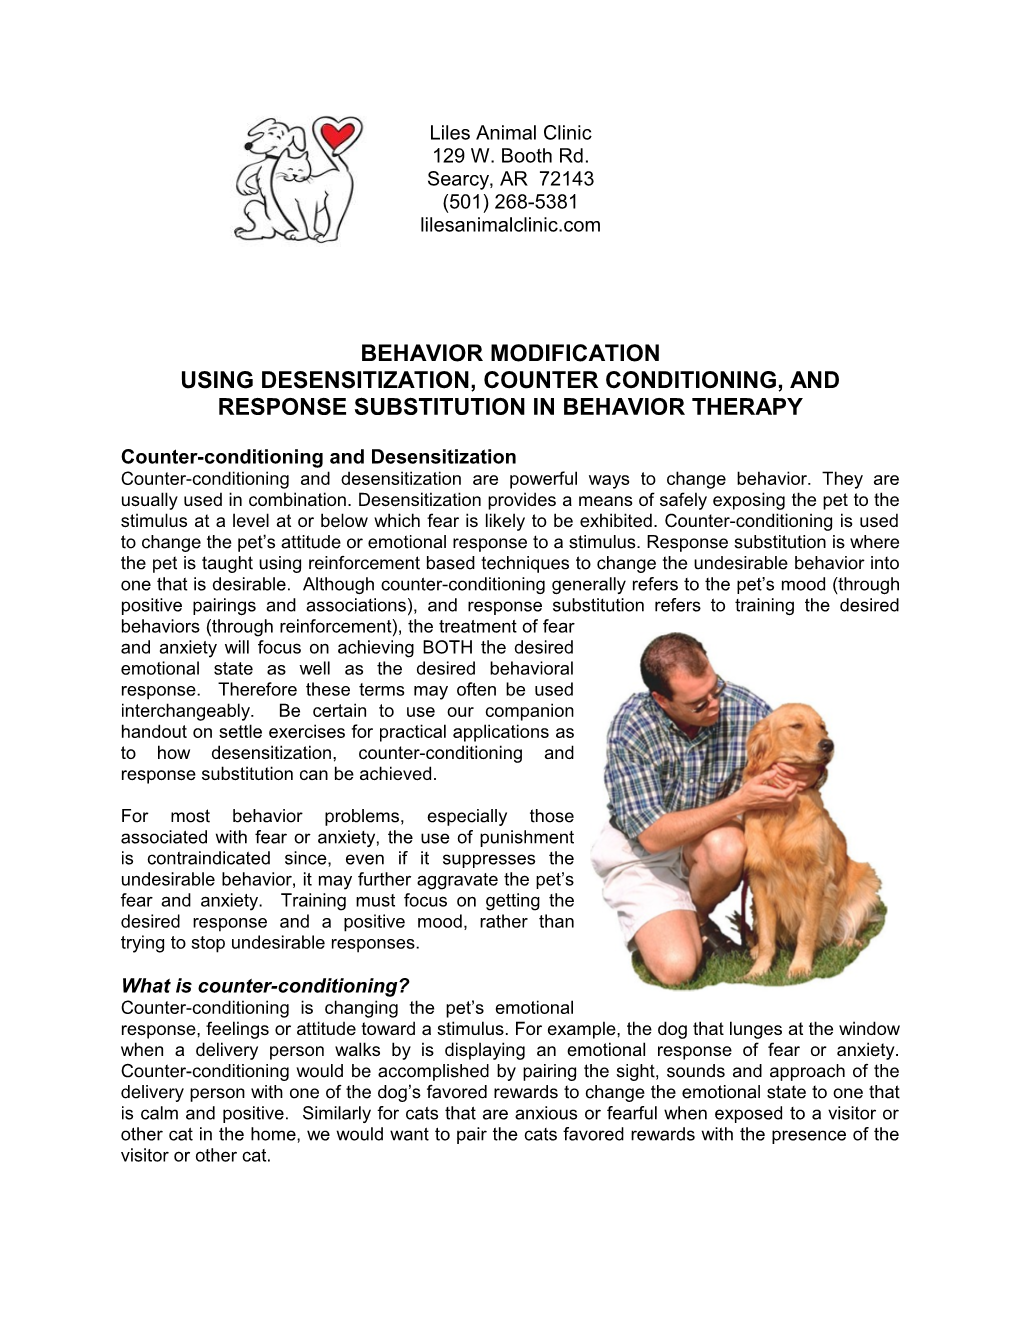 Using Desensitization, Counter Conditioning, and Response Substitution in Behavior Therapy